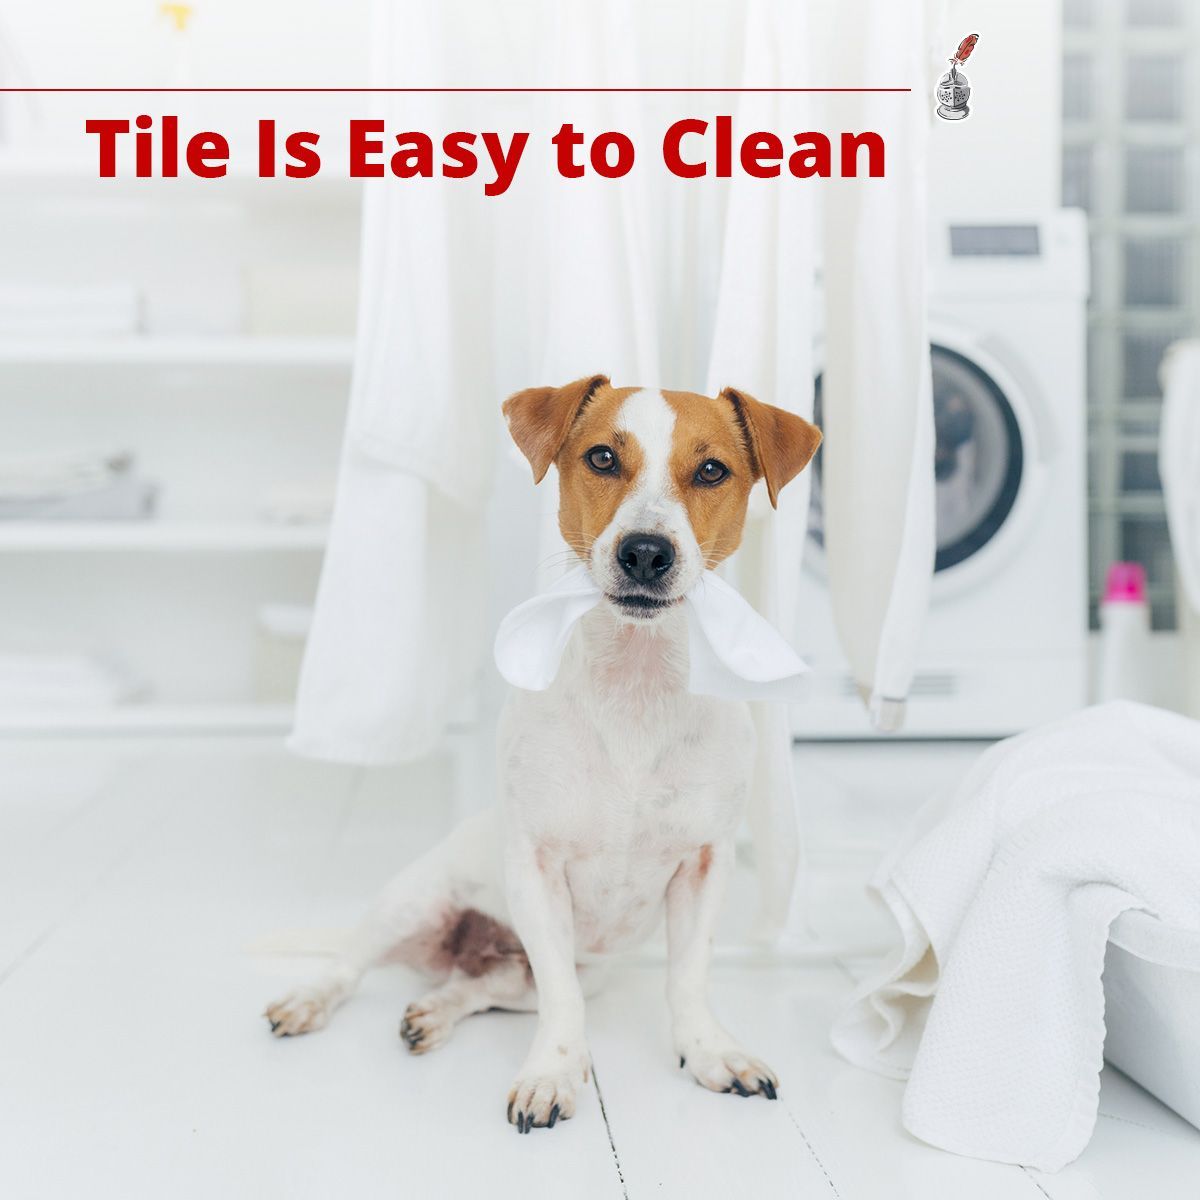 Tile Is Easy to Clean